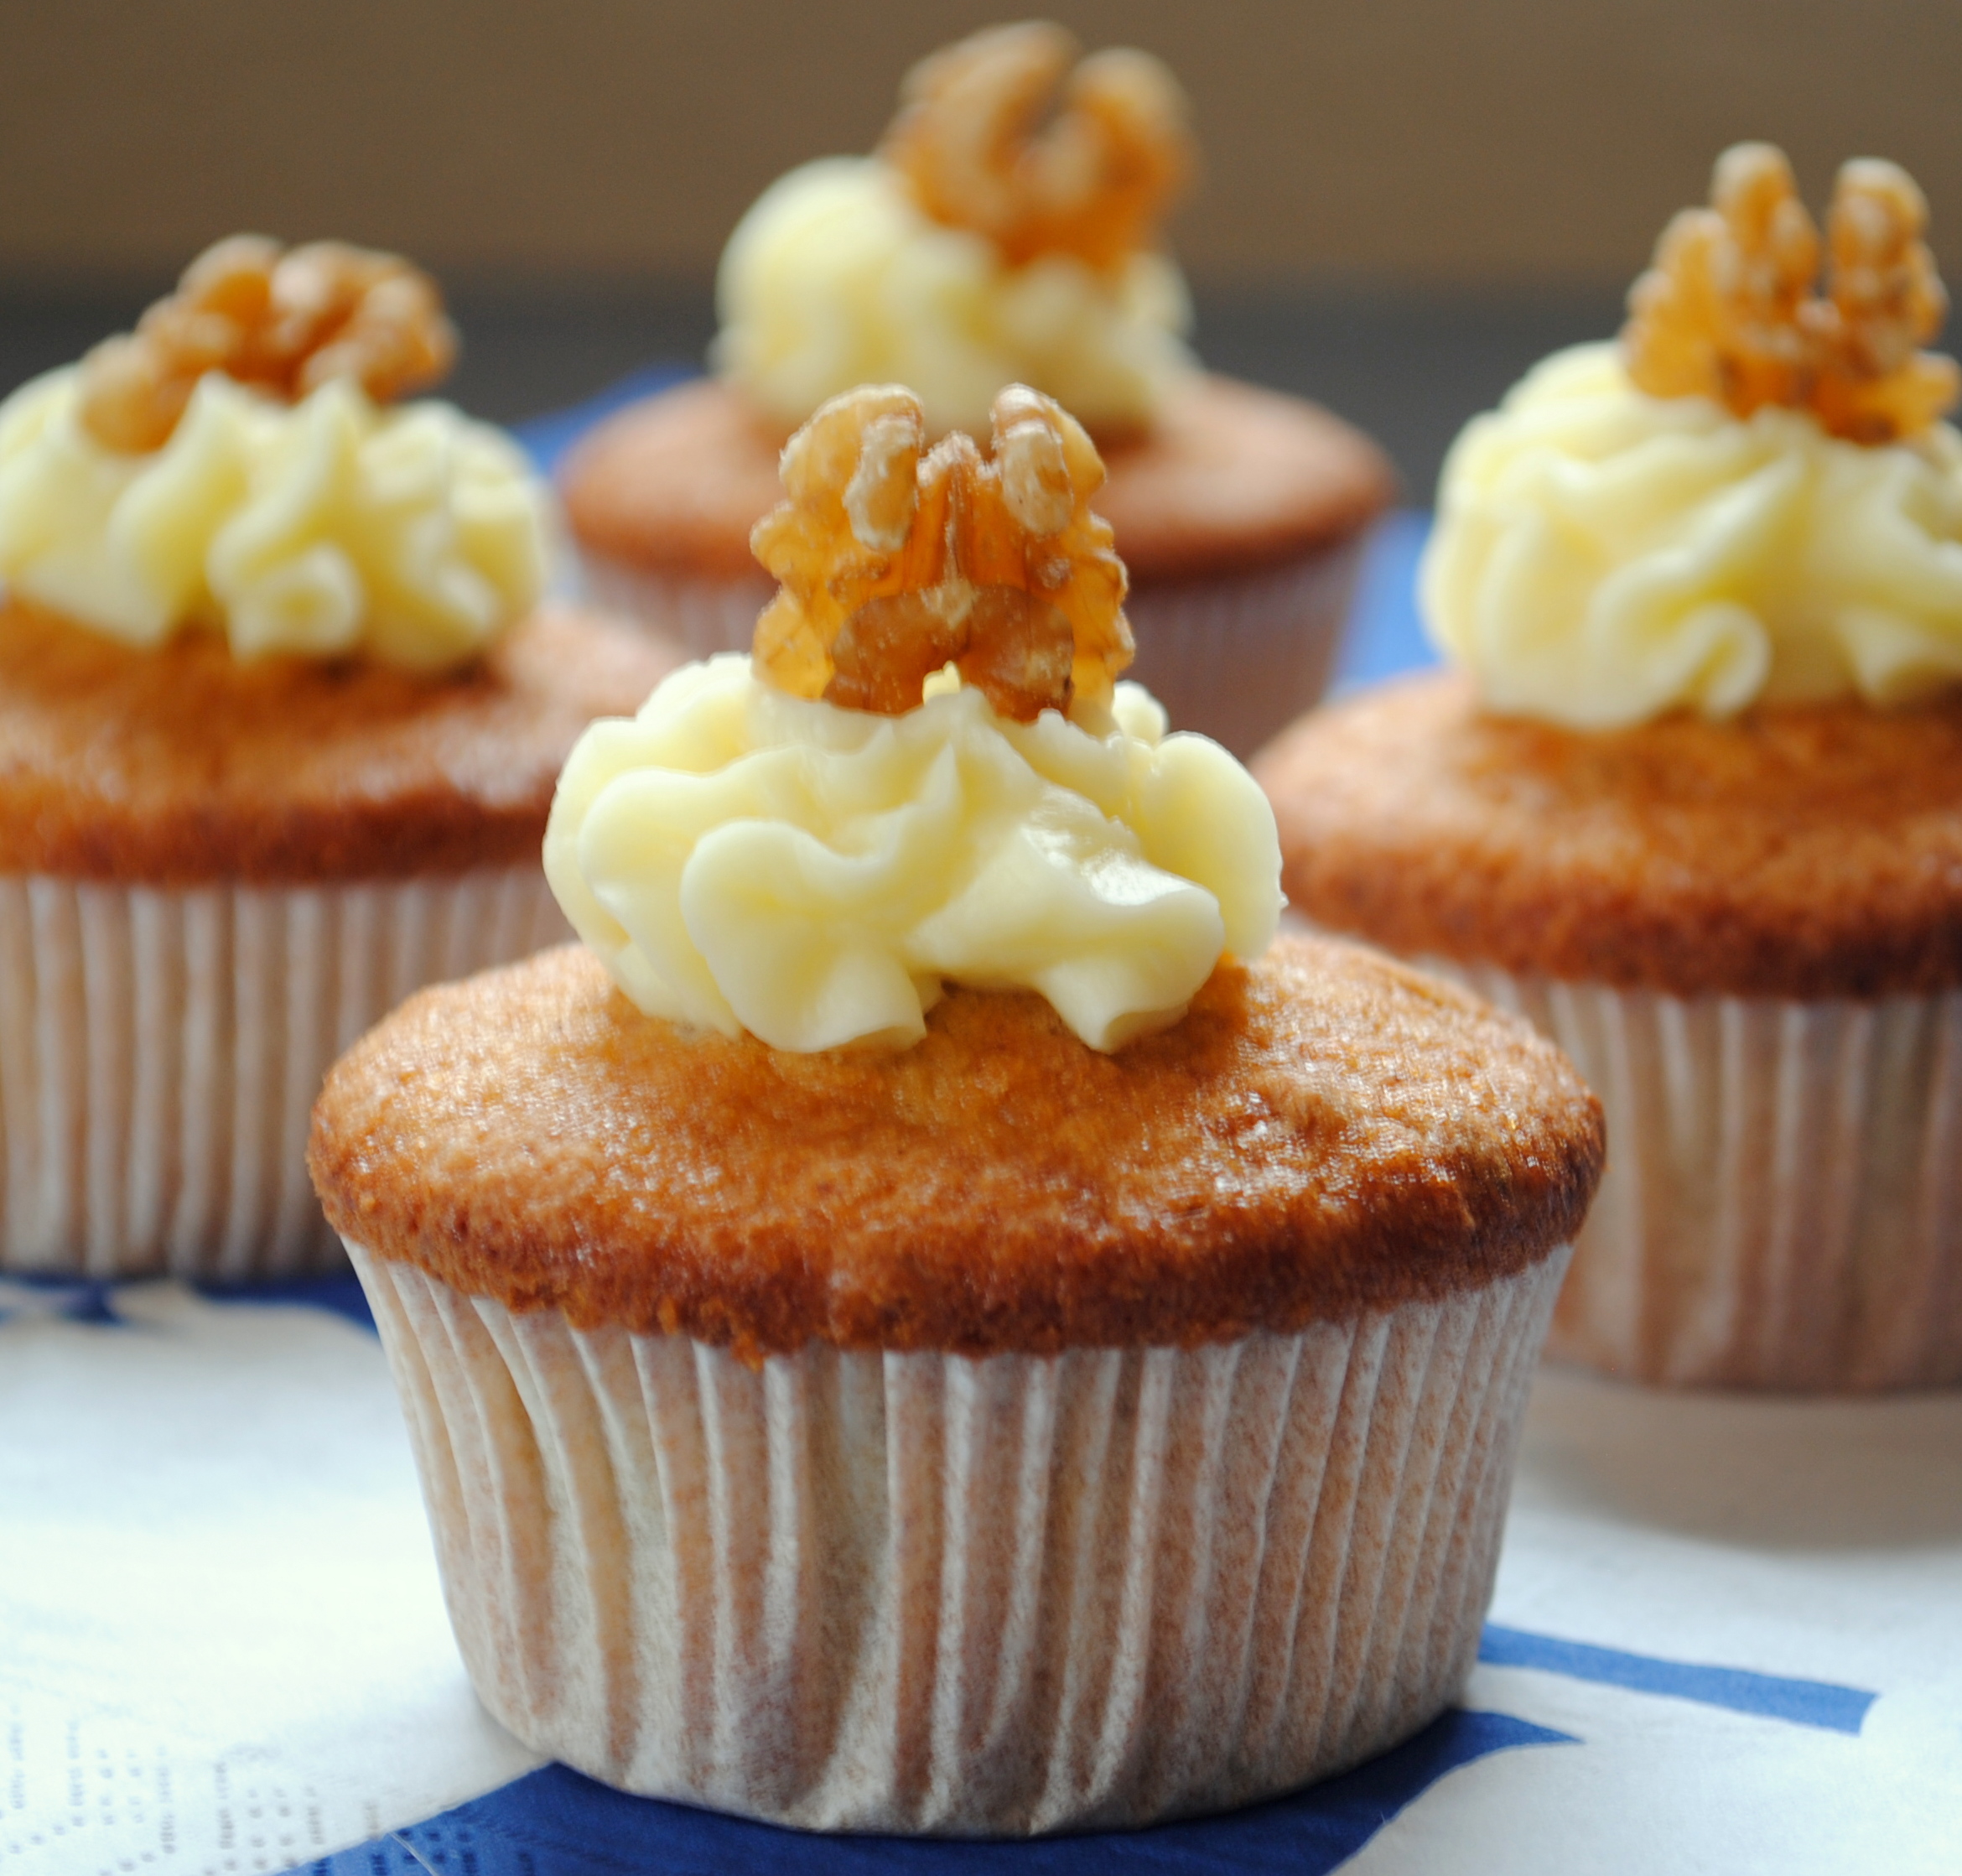 Banana Nut Cupcakes with Cream Cheese Frosting